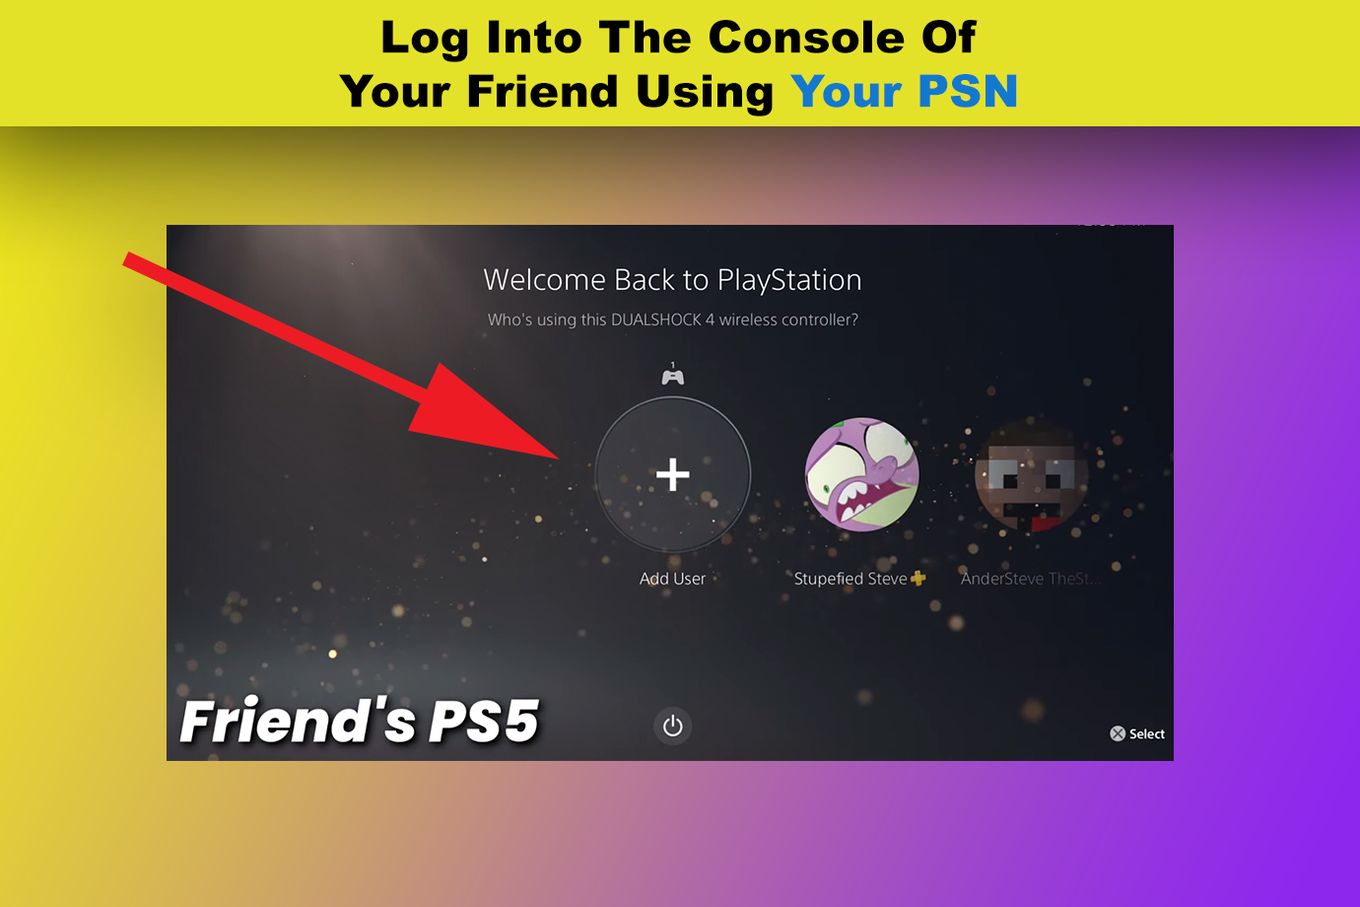 Log Into Your Friend’s PS5 console